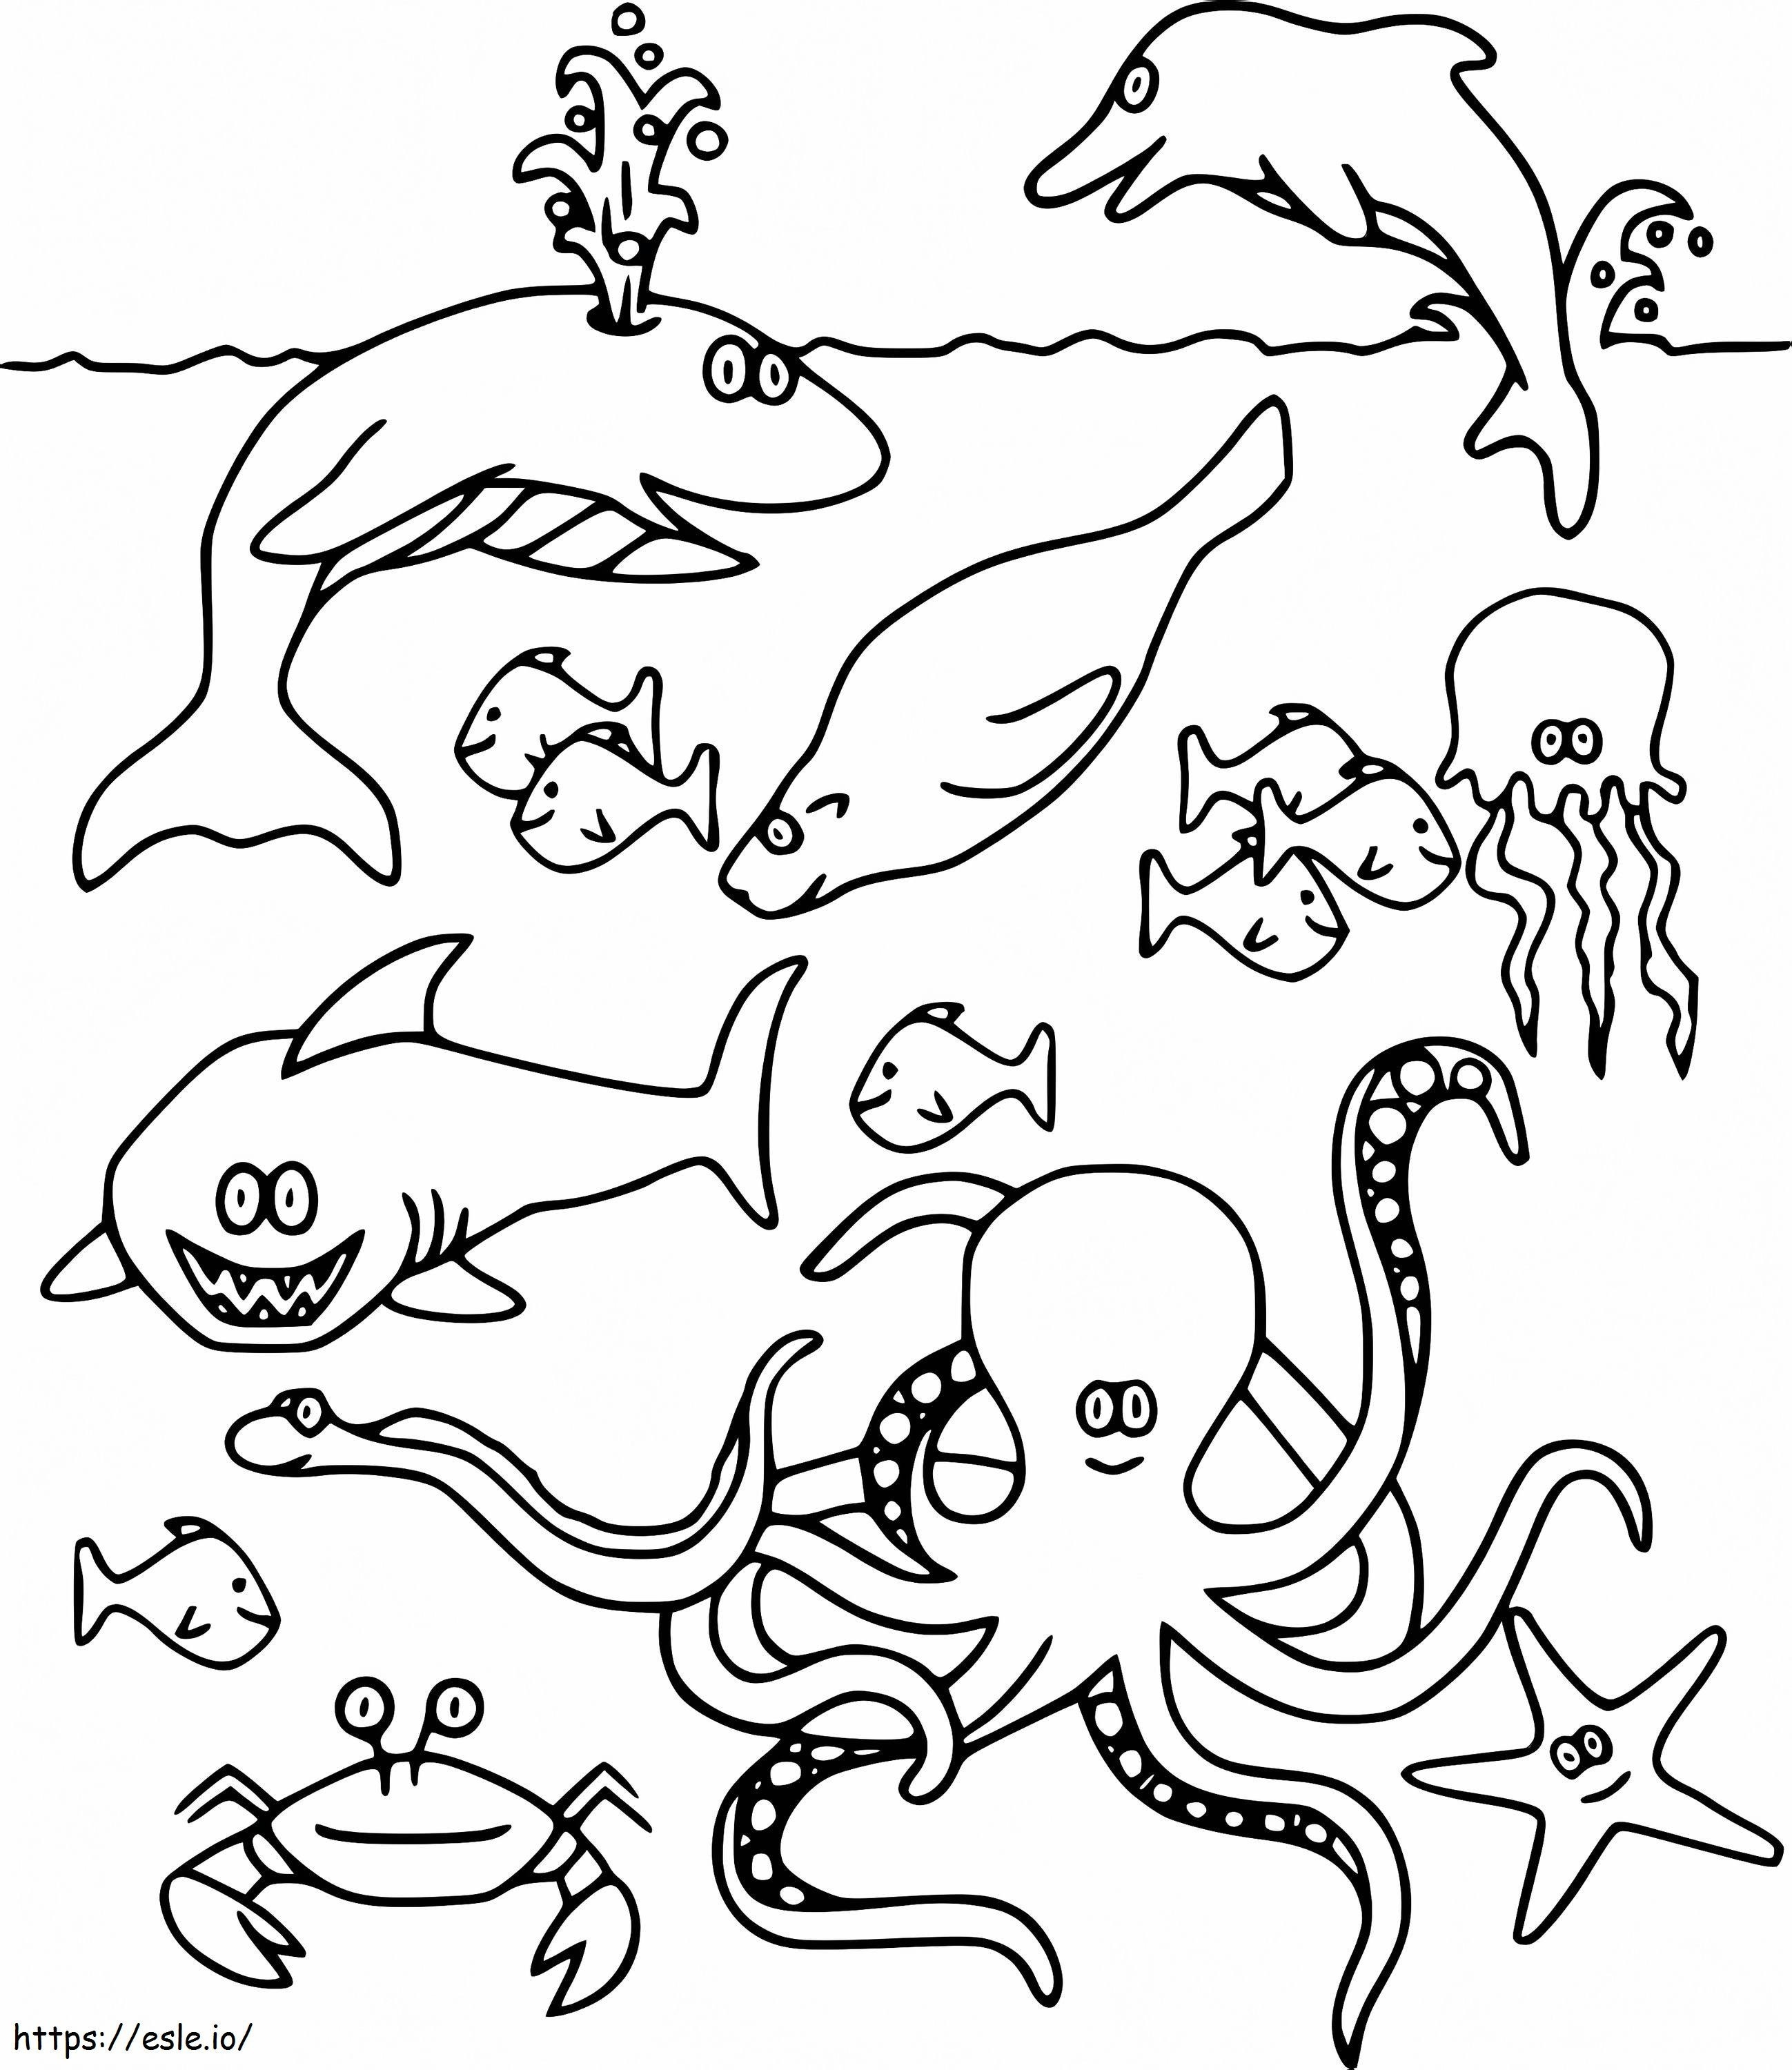 Ocean Life To Color coloring page